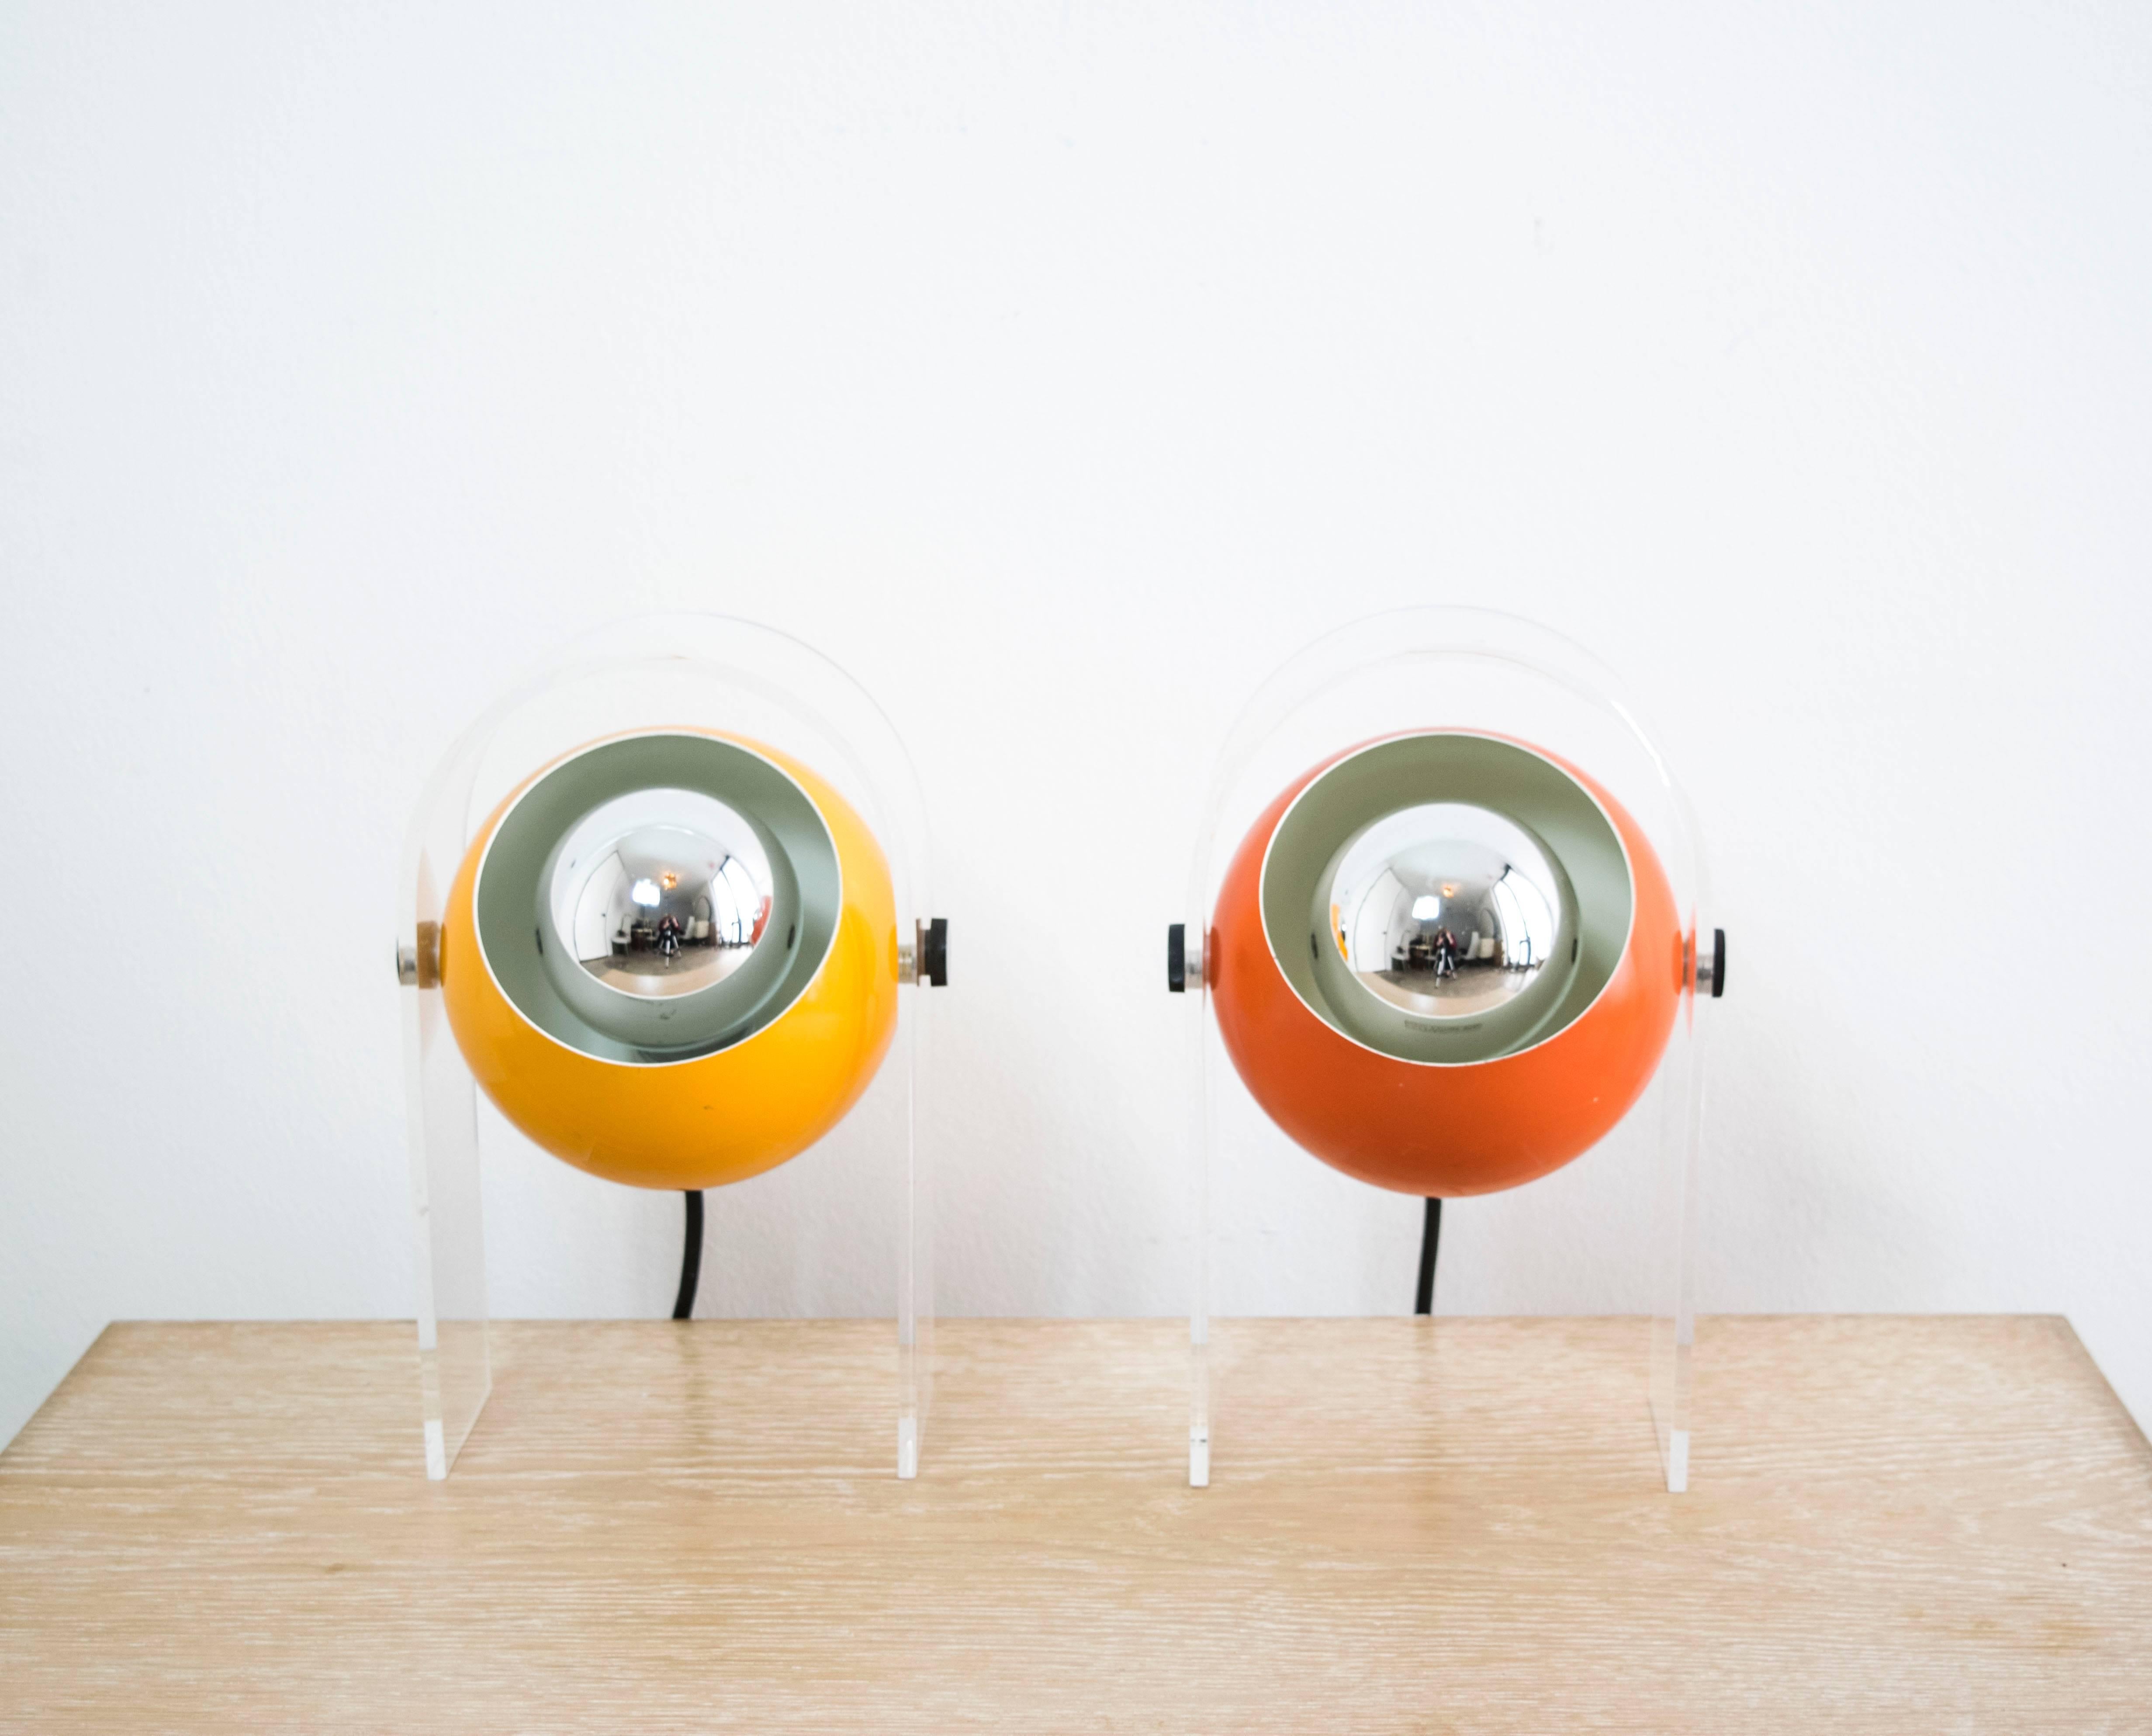 A pair of contrasting orange lucite eye lamps in Op Art style circa 1960s.